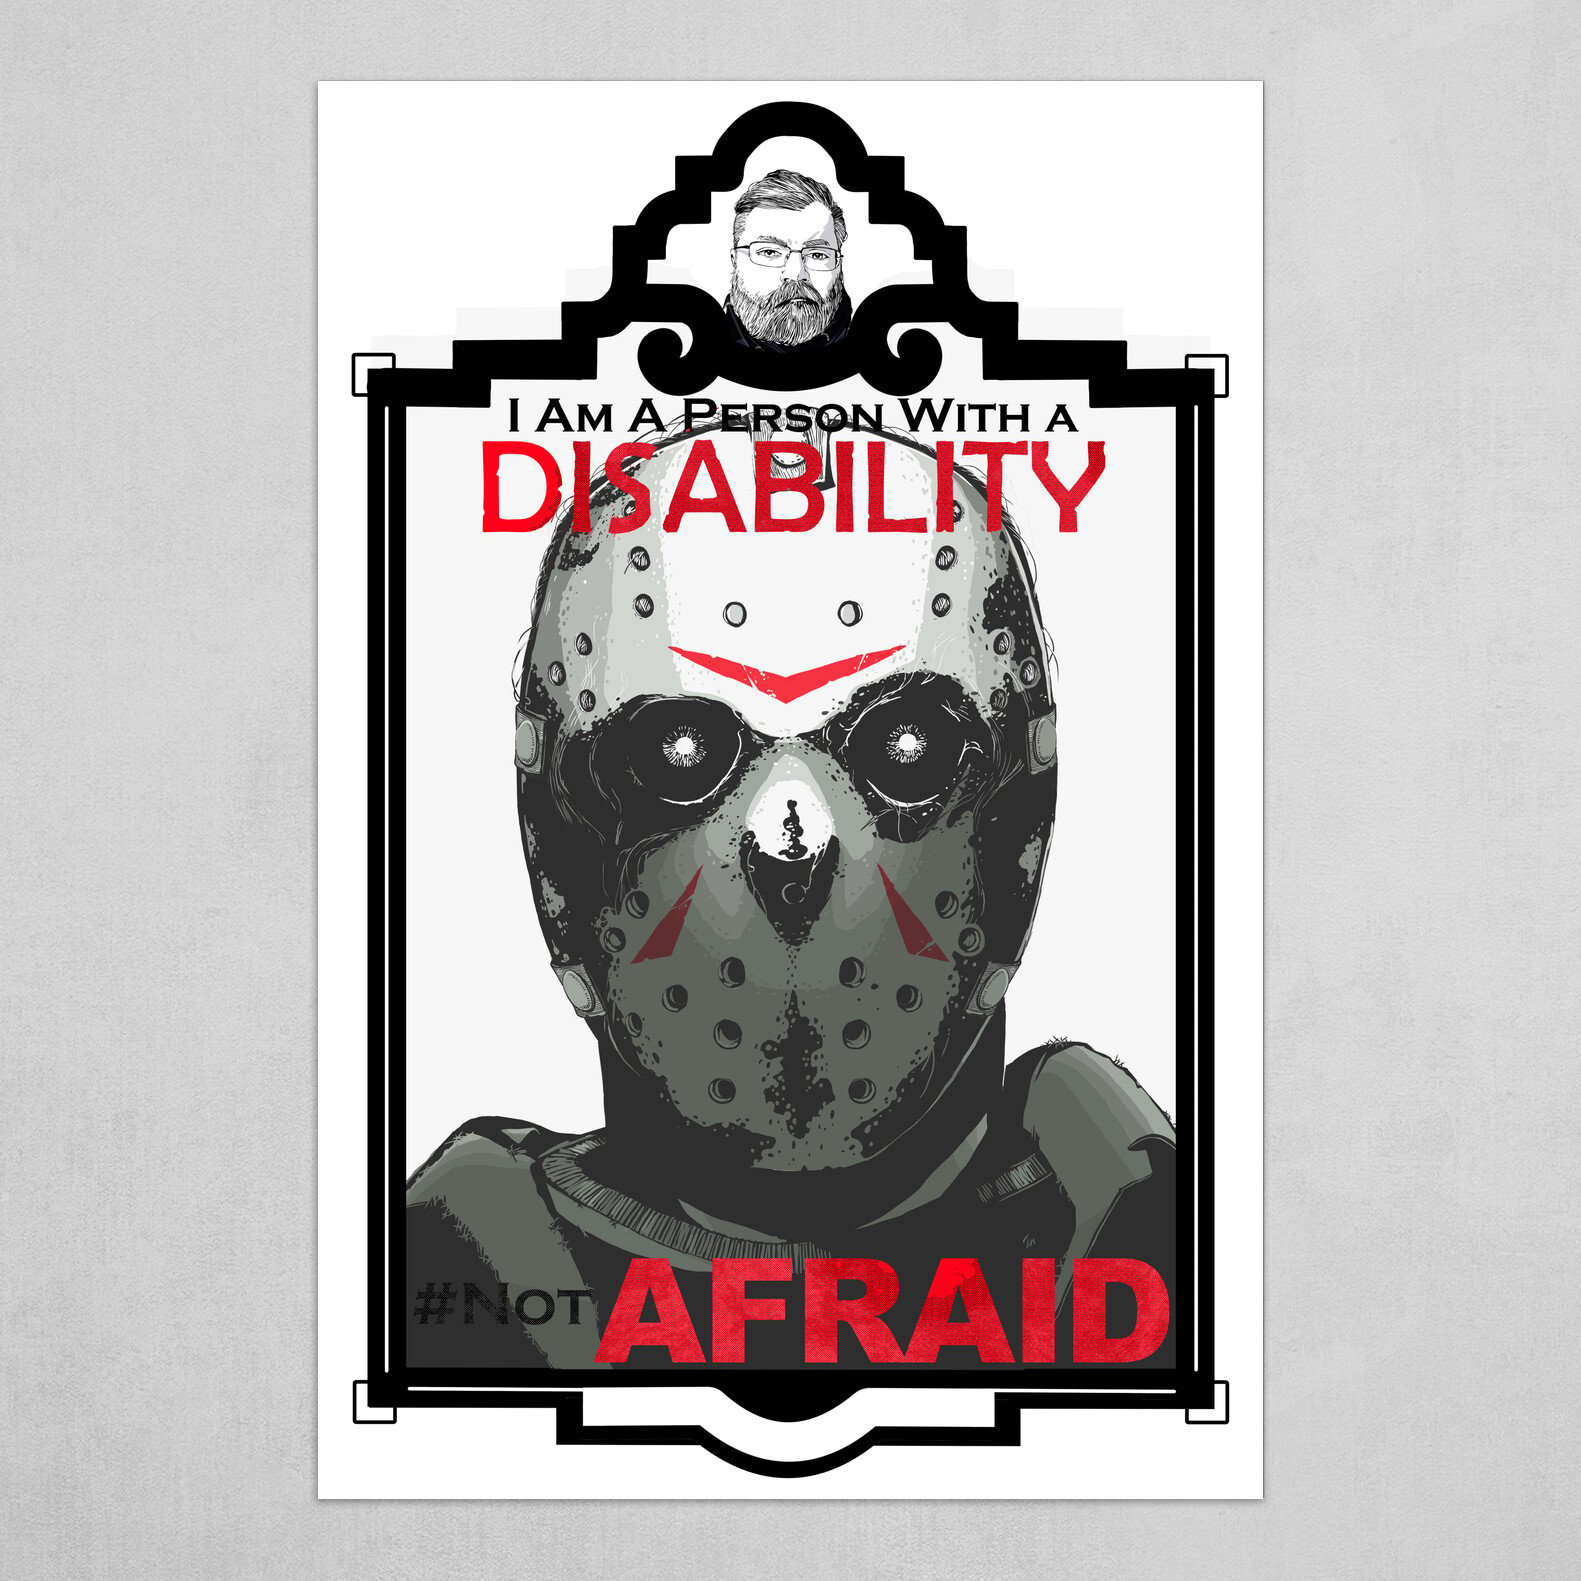 I am a Person with a Disability #NotAfraid